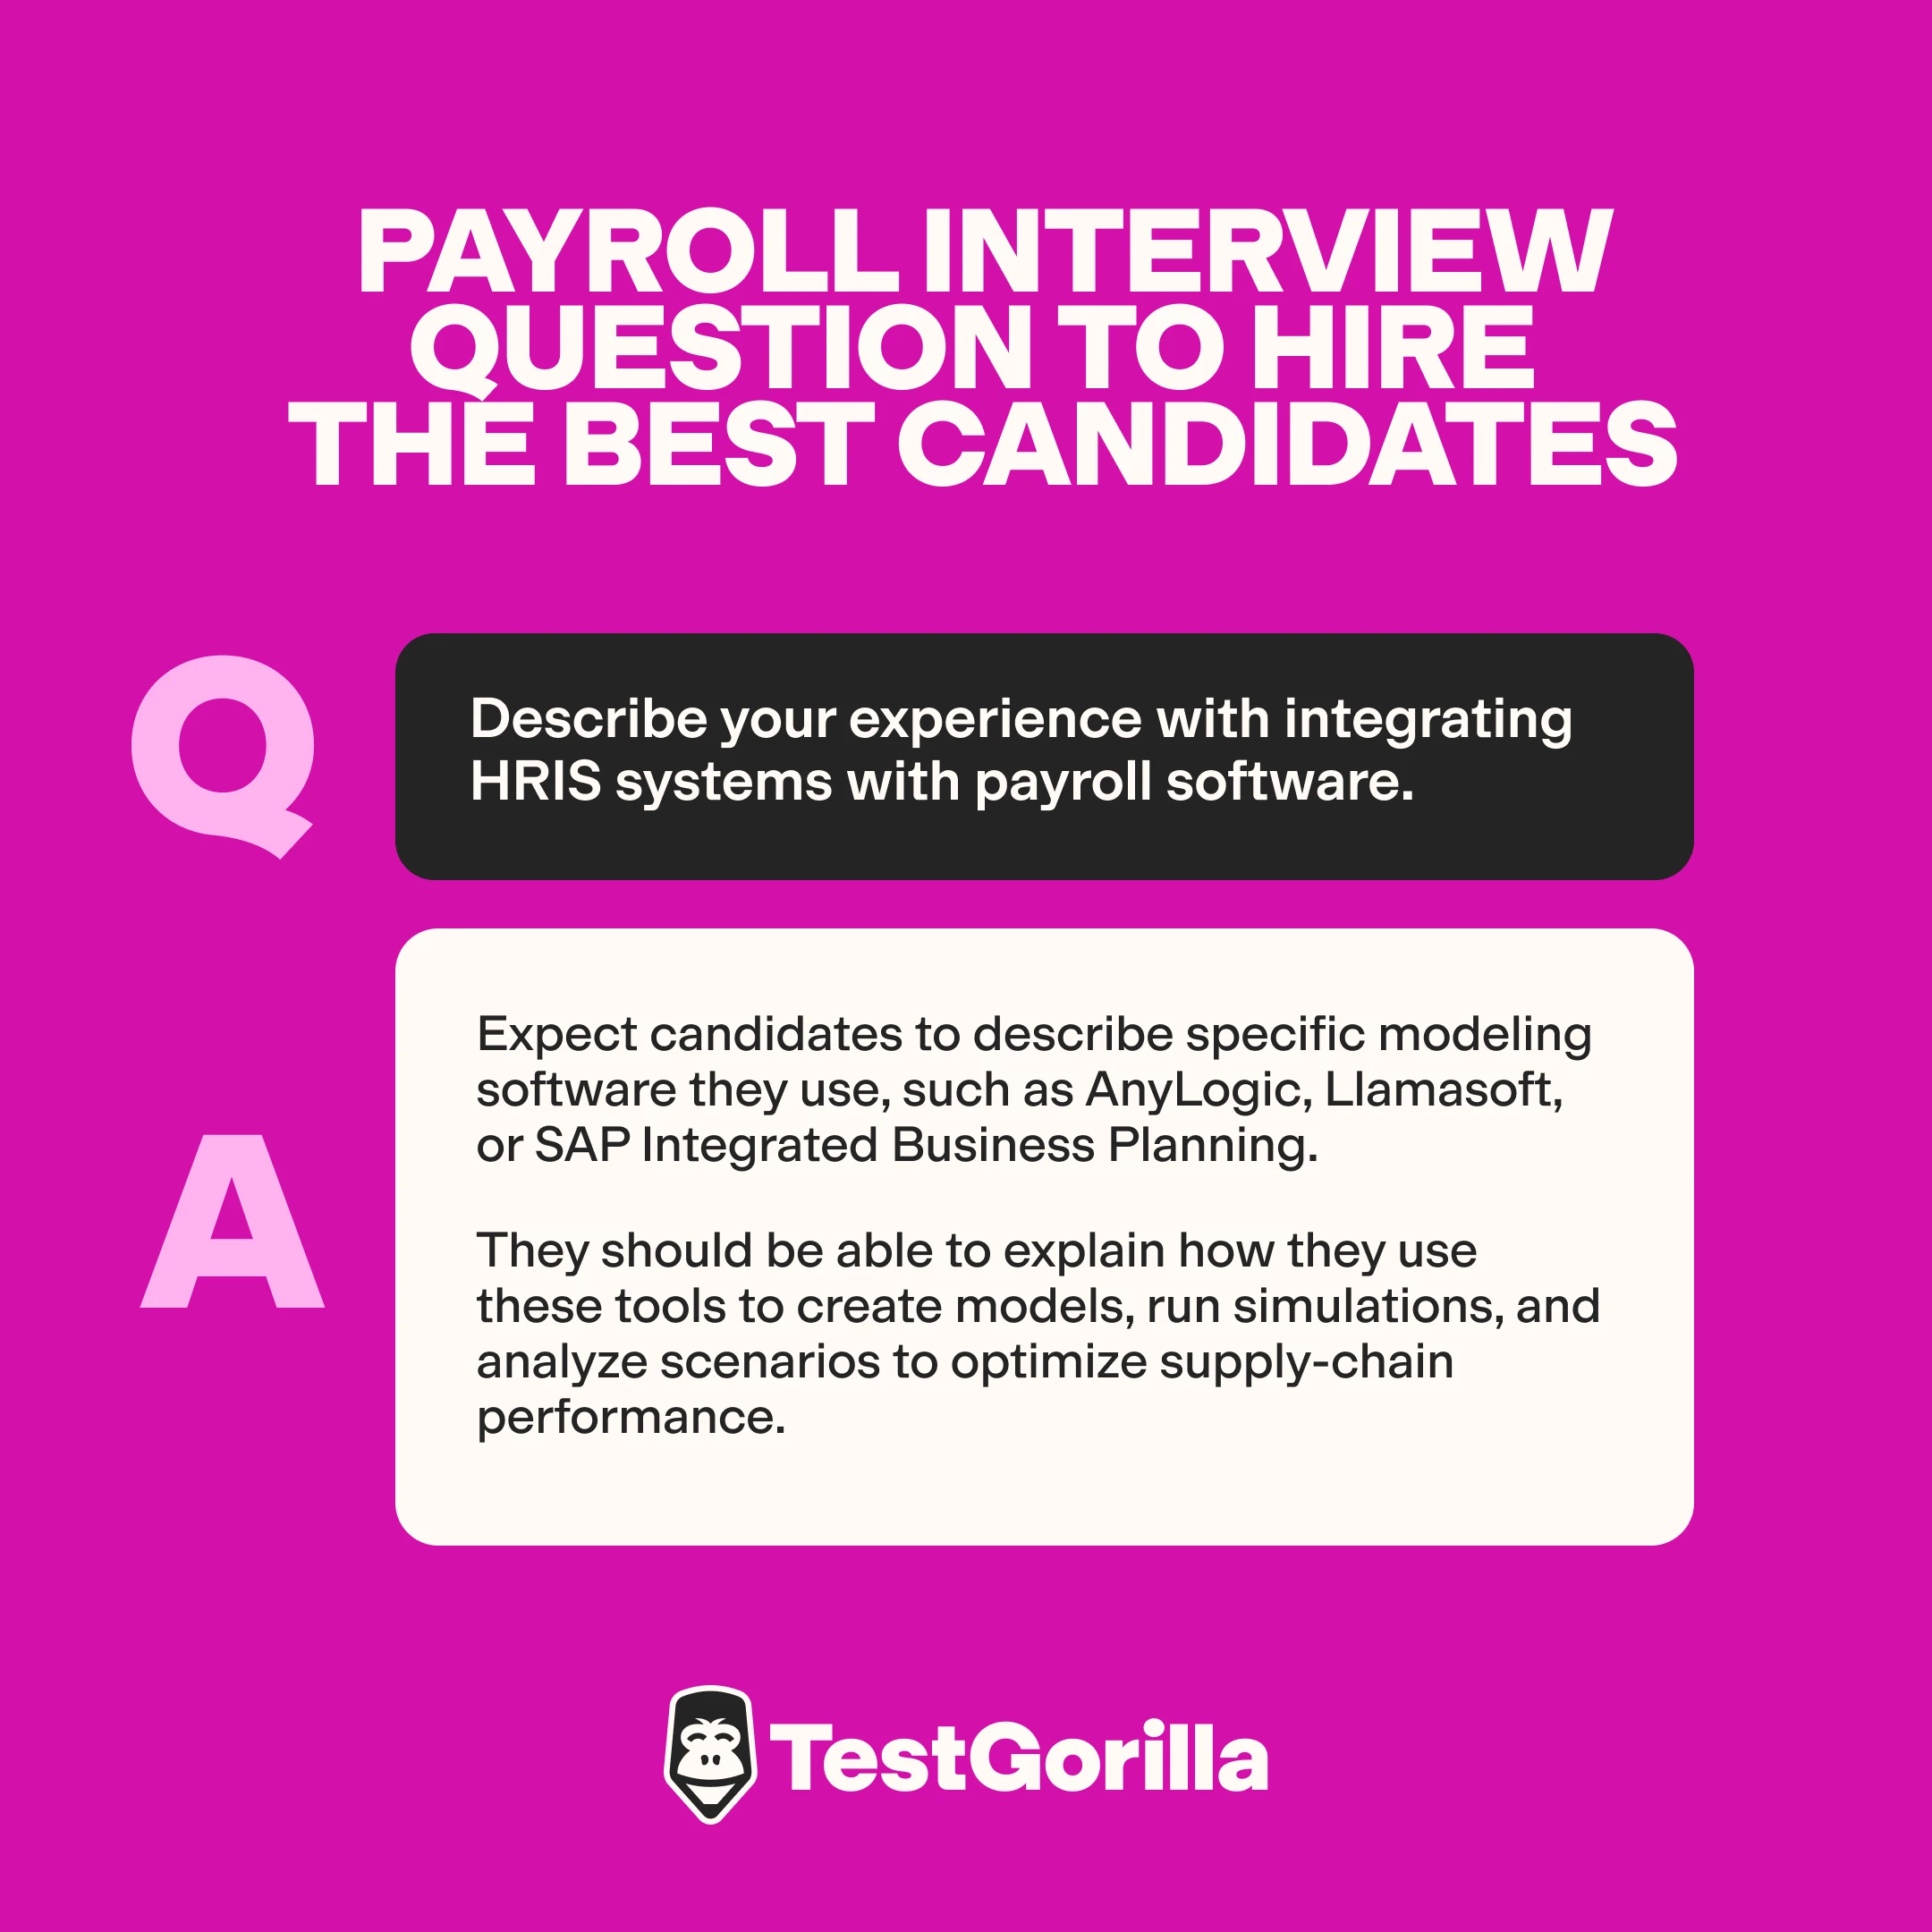 Describe your experience with integrating HRIS systems with payroll software.